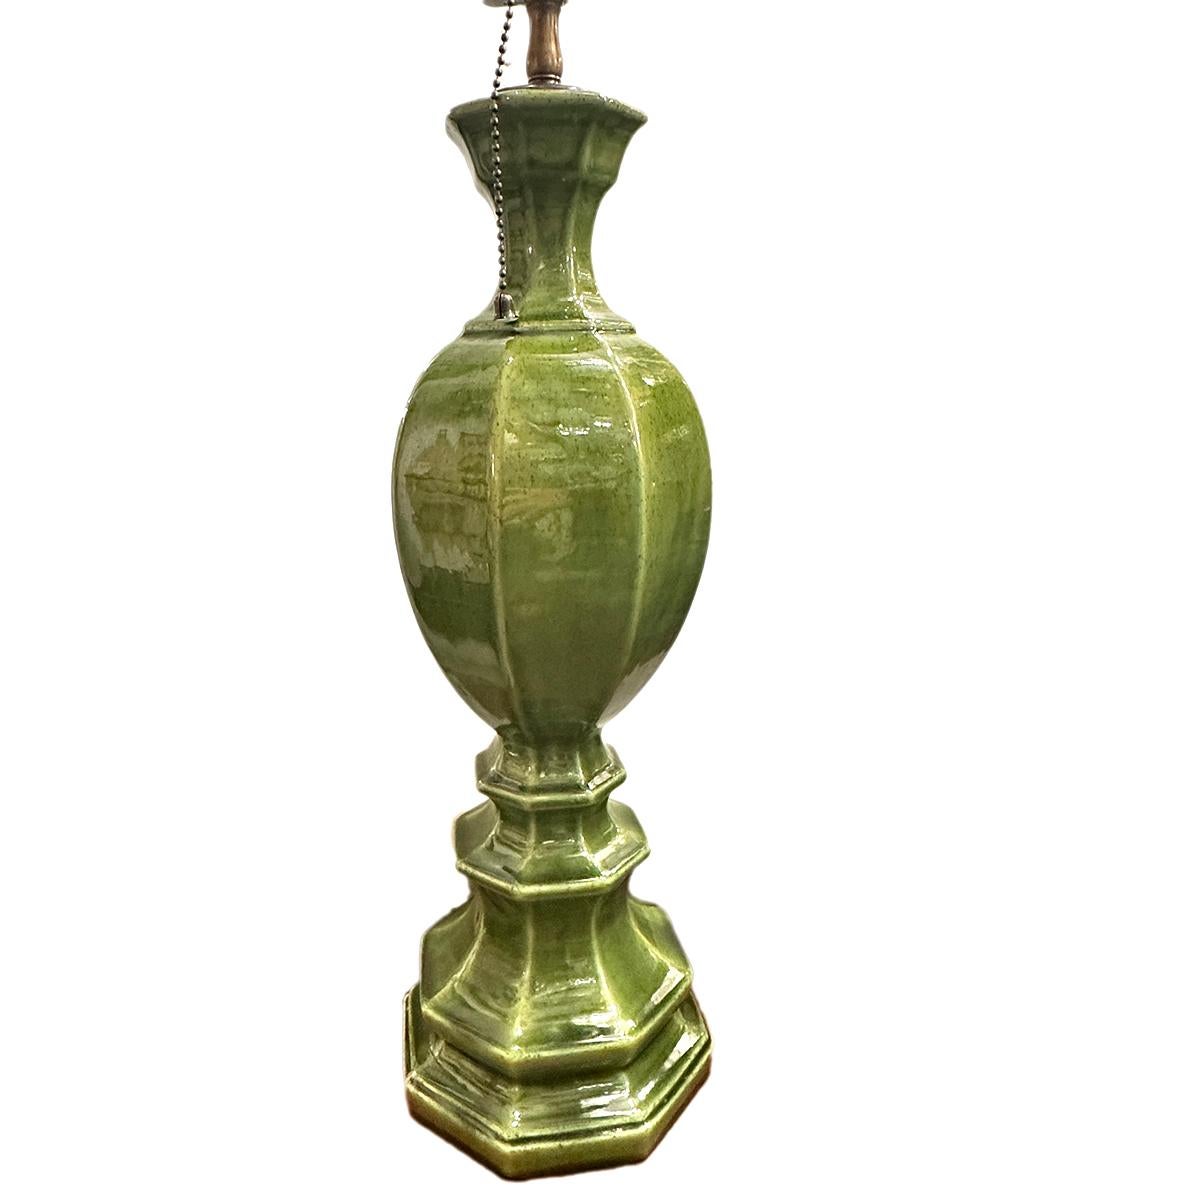 A circa 1960s Italian green glazed porcelain lamp.

Measurements:
Height of body: 18?
Height to shade rest: 28? (adjustable)
Diameter: 6?.